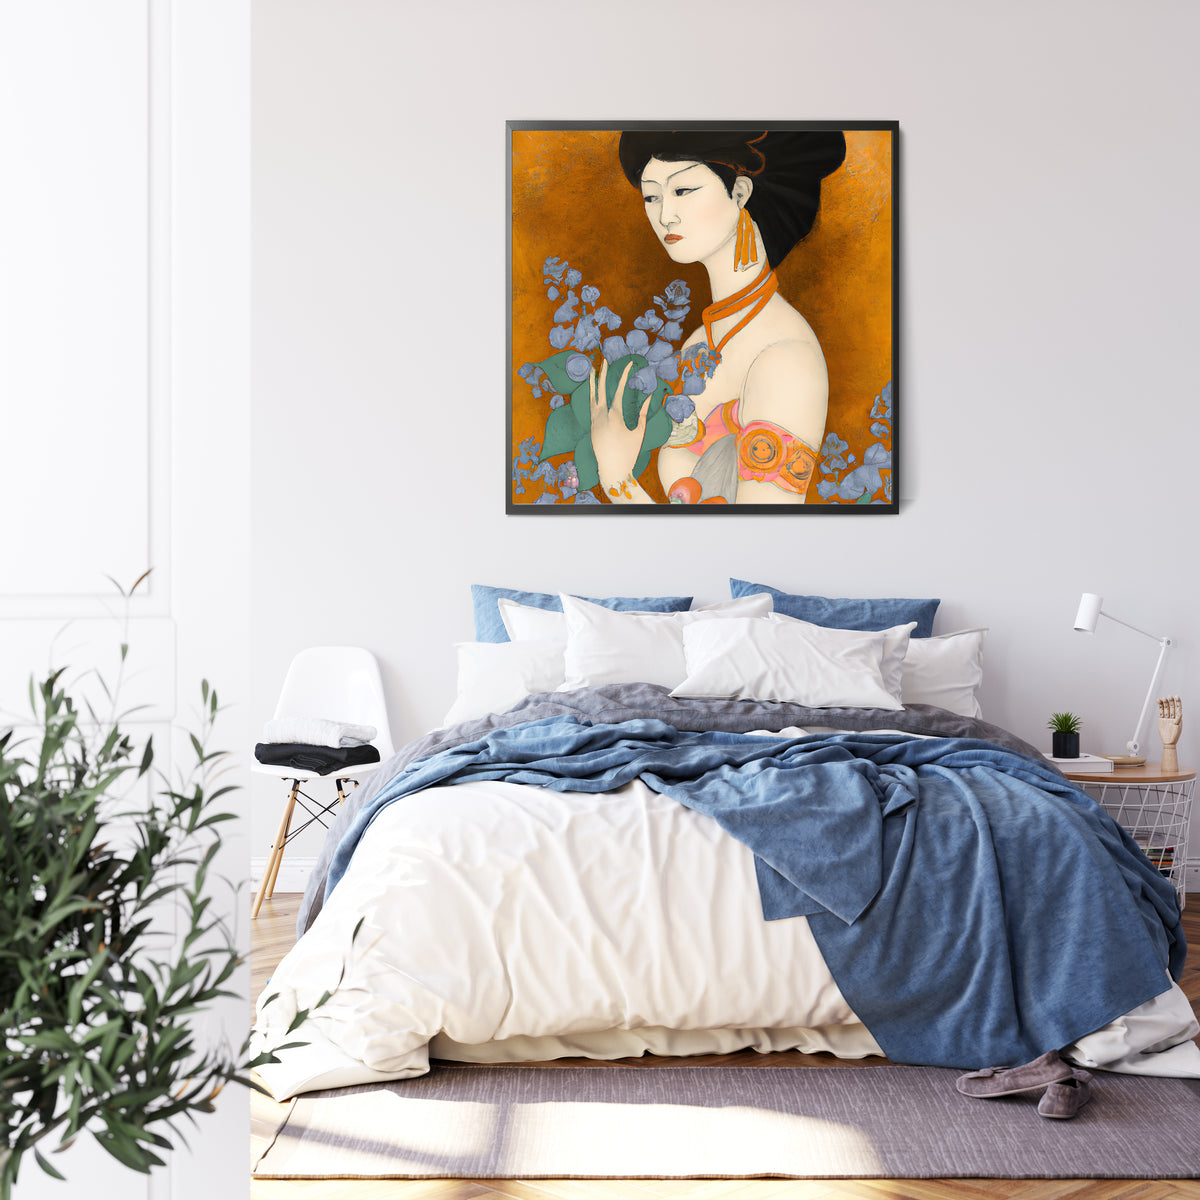 interior bedroom view with a framed Fine Art Poster Print of a painted image of a Geisha holding some violets 